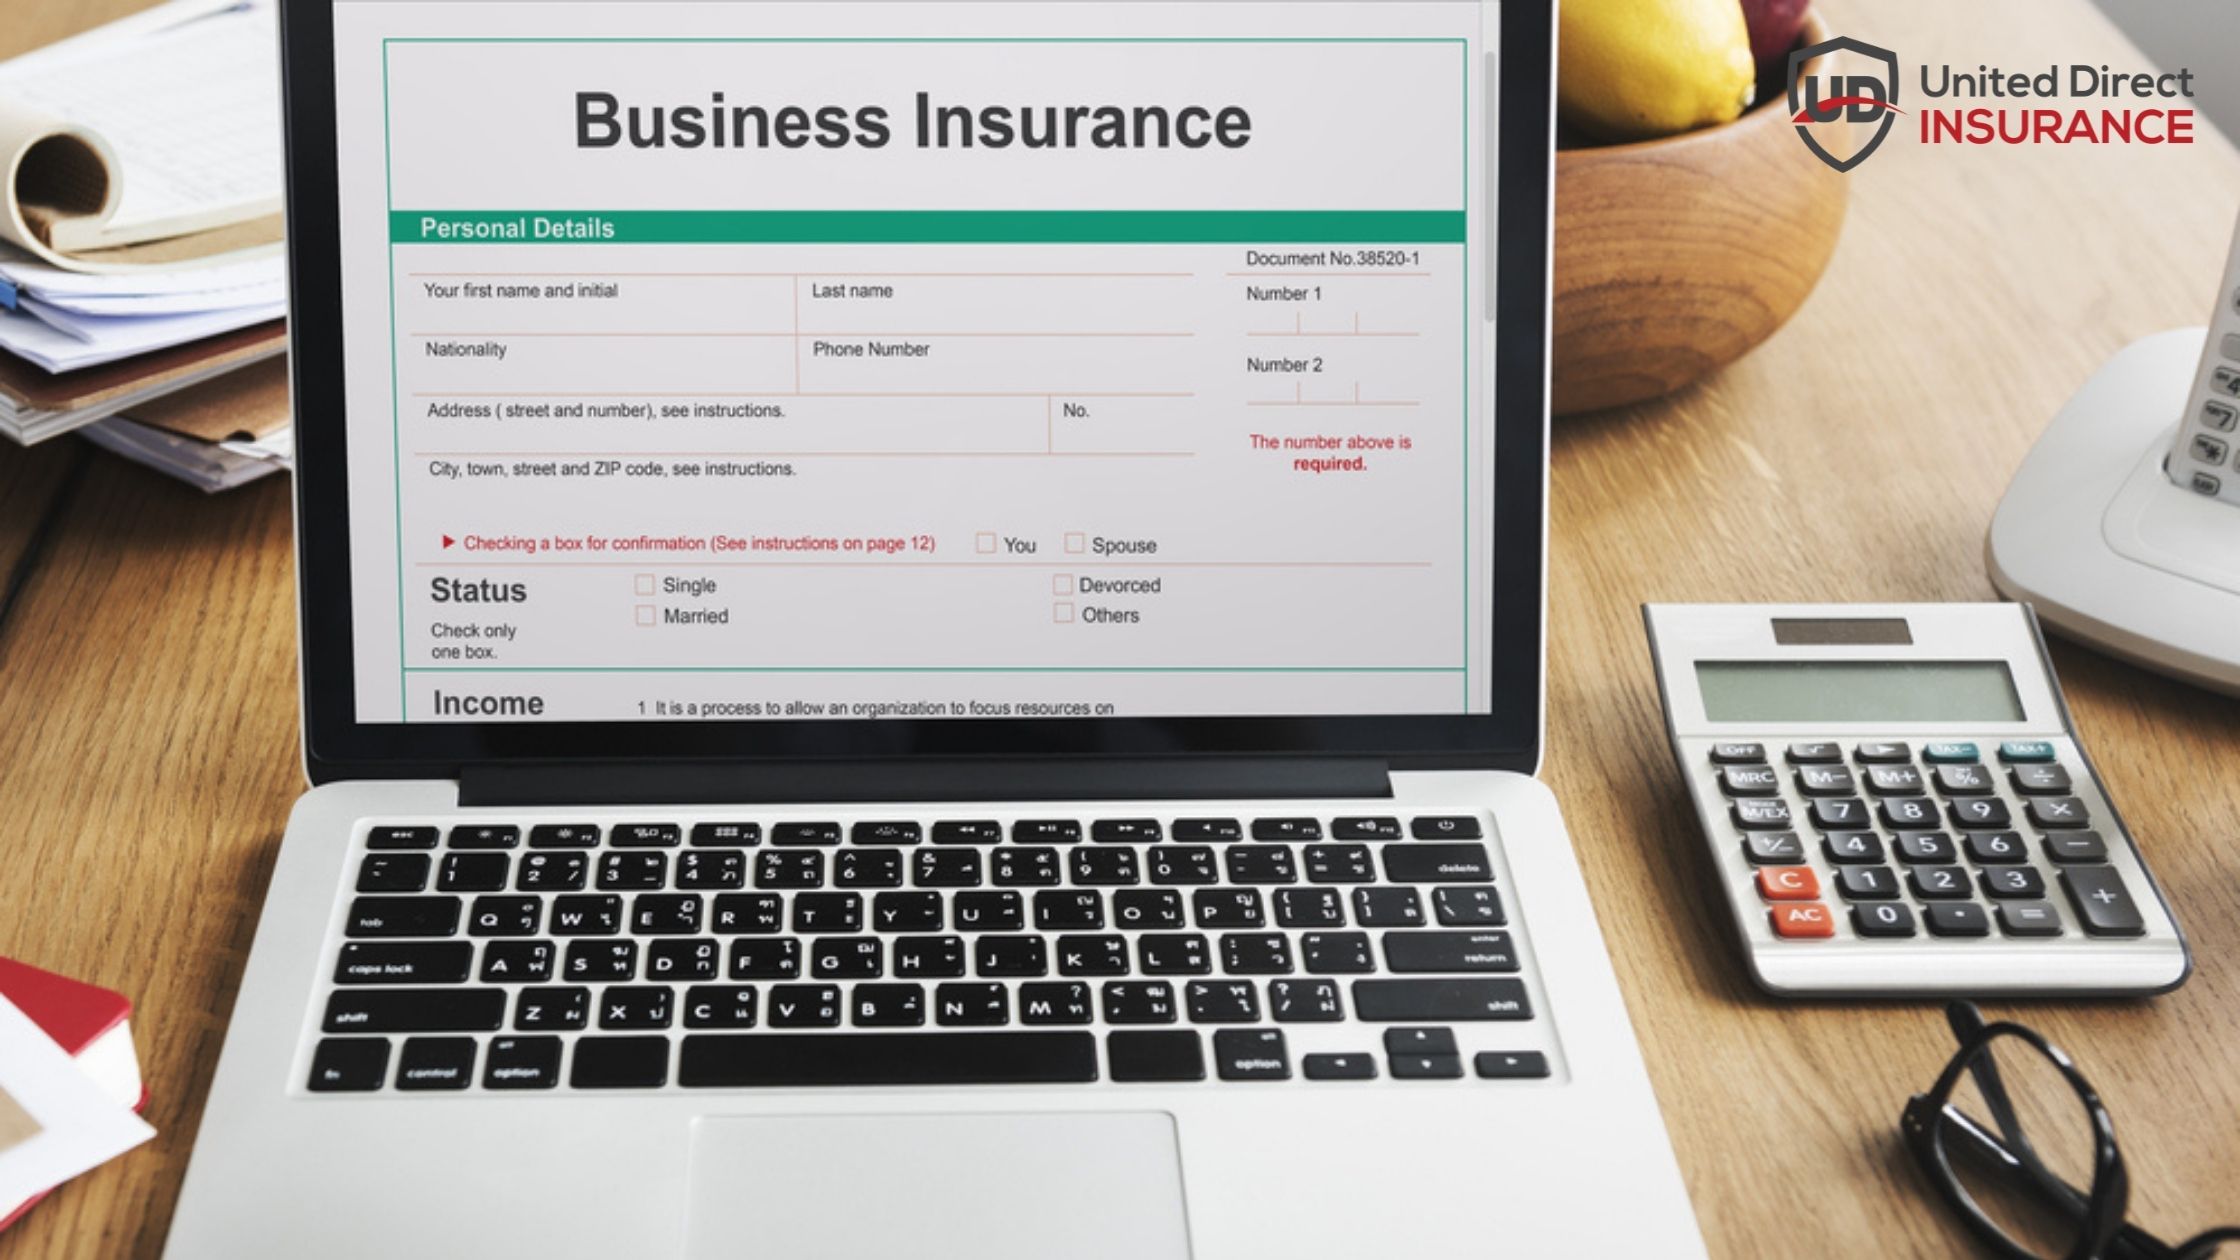 Different Business, Different Insurance? - Nine Types of Business Insurance to Consider